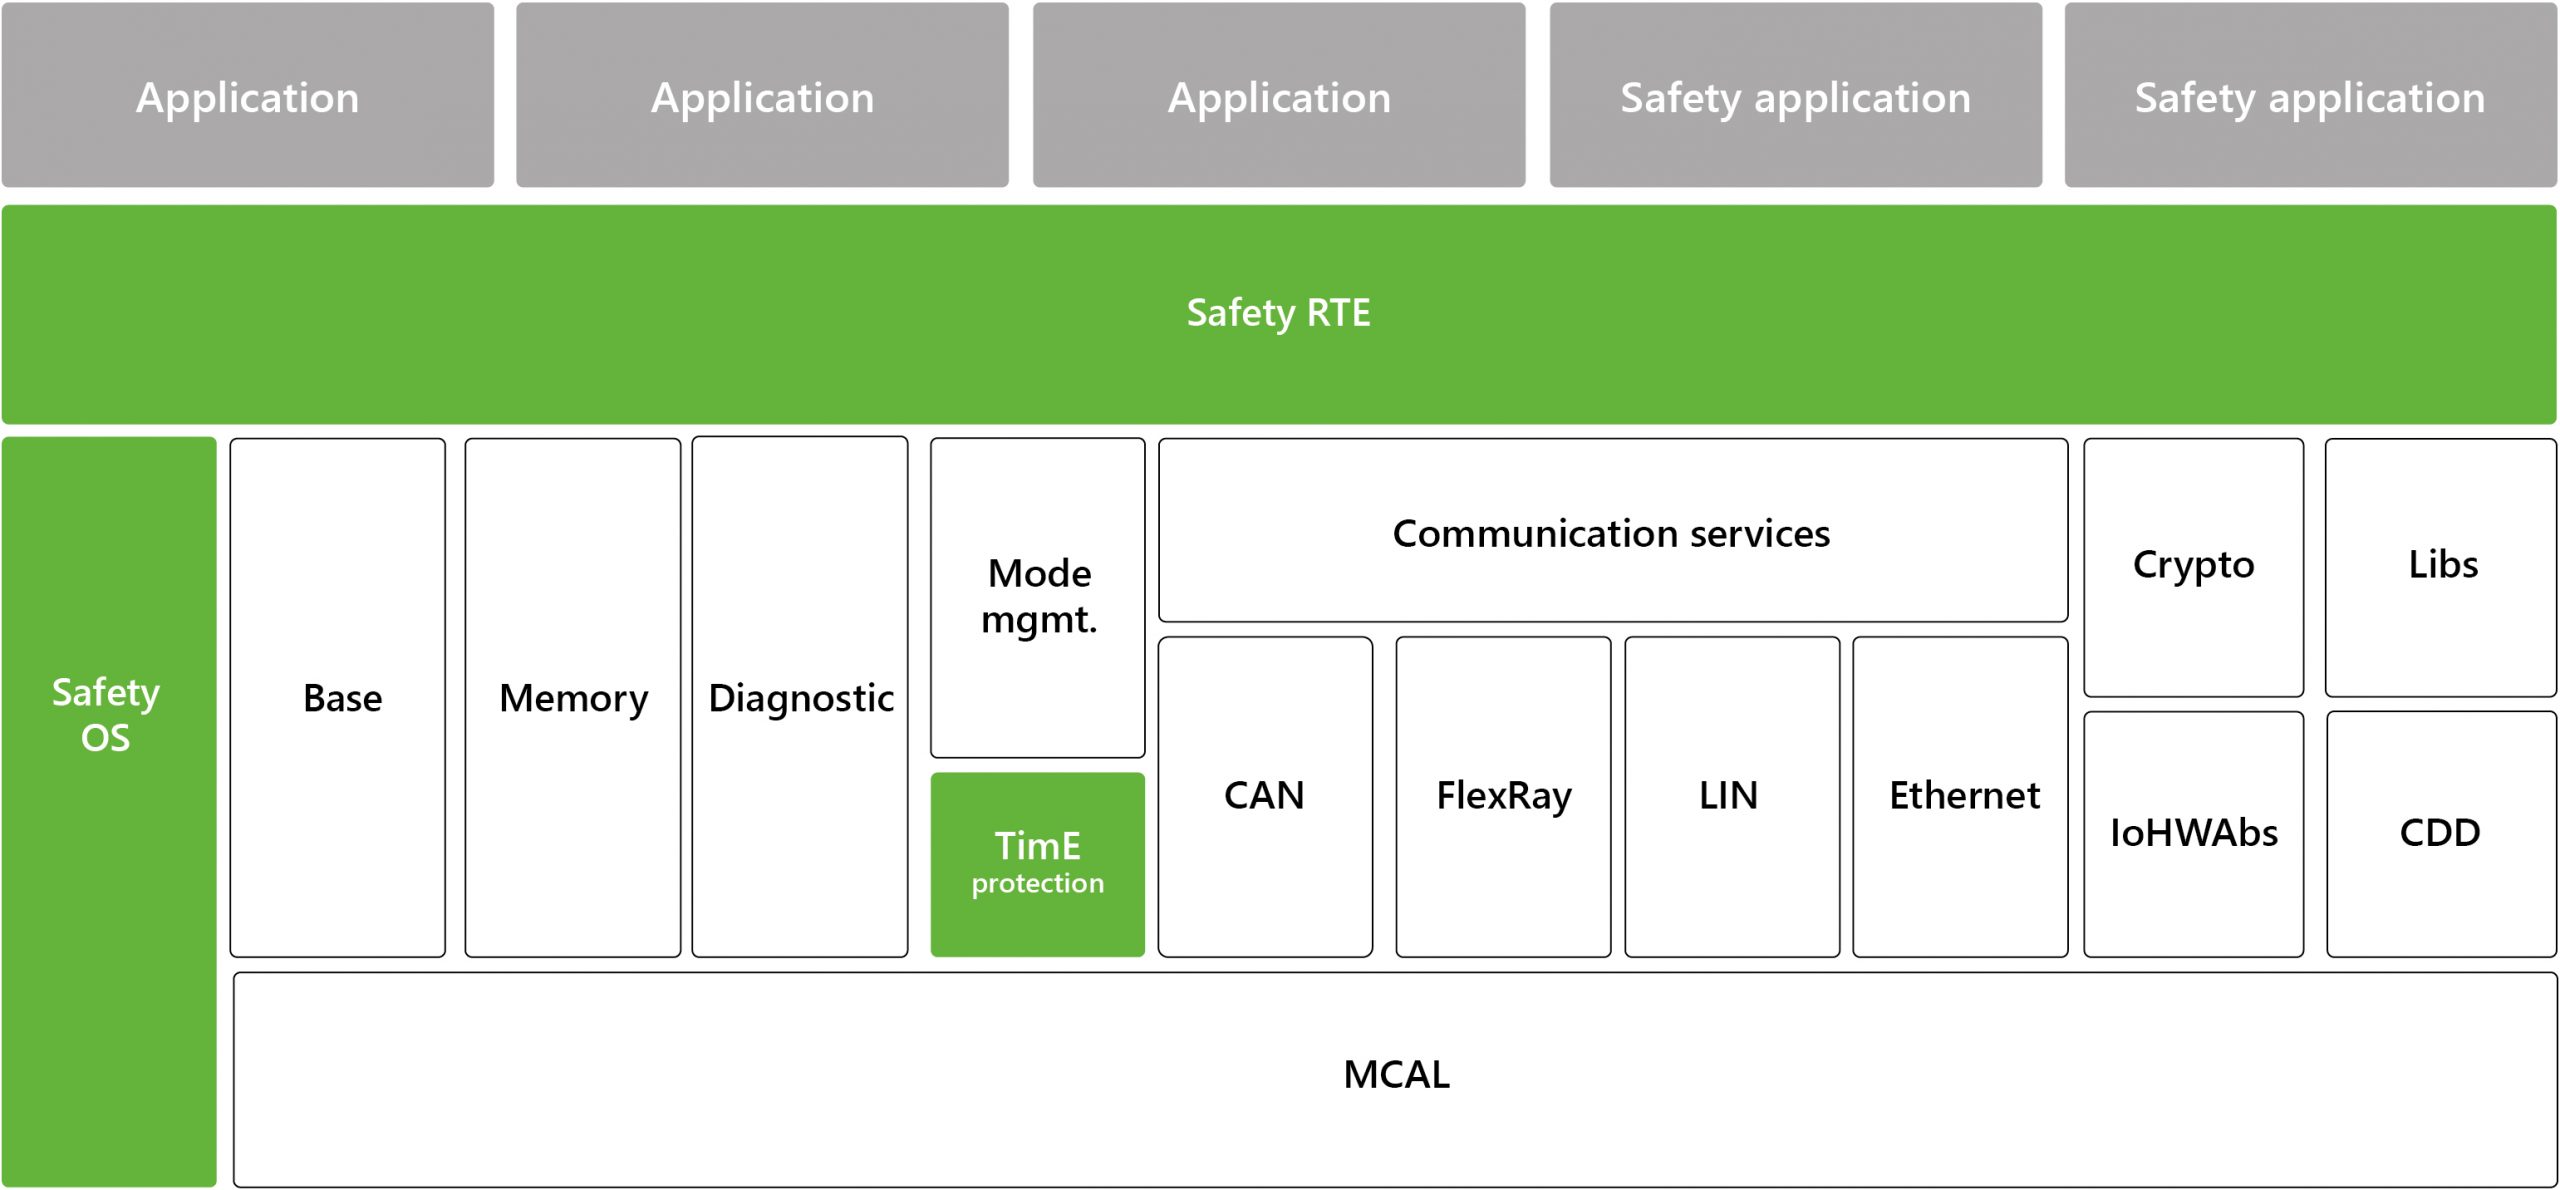 Functional Safety ISO 26262 within a software architecture